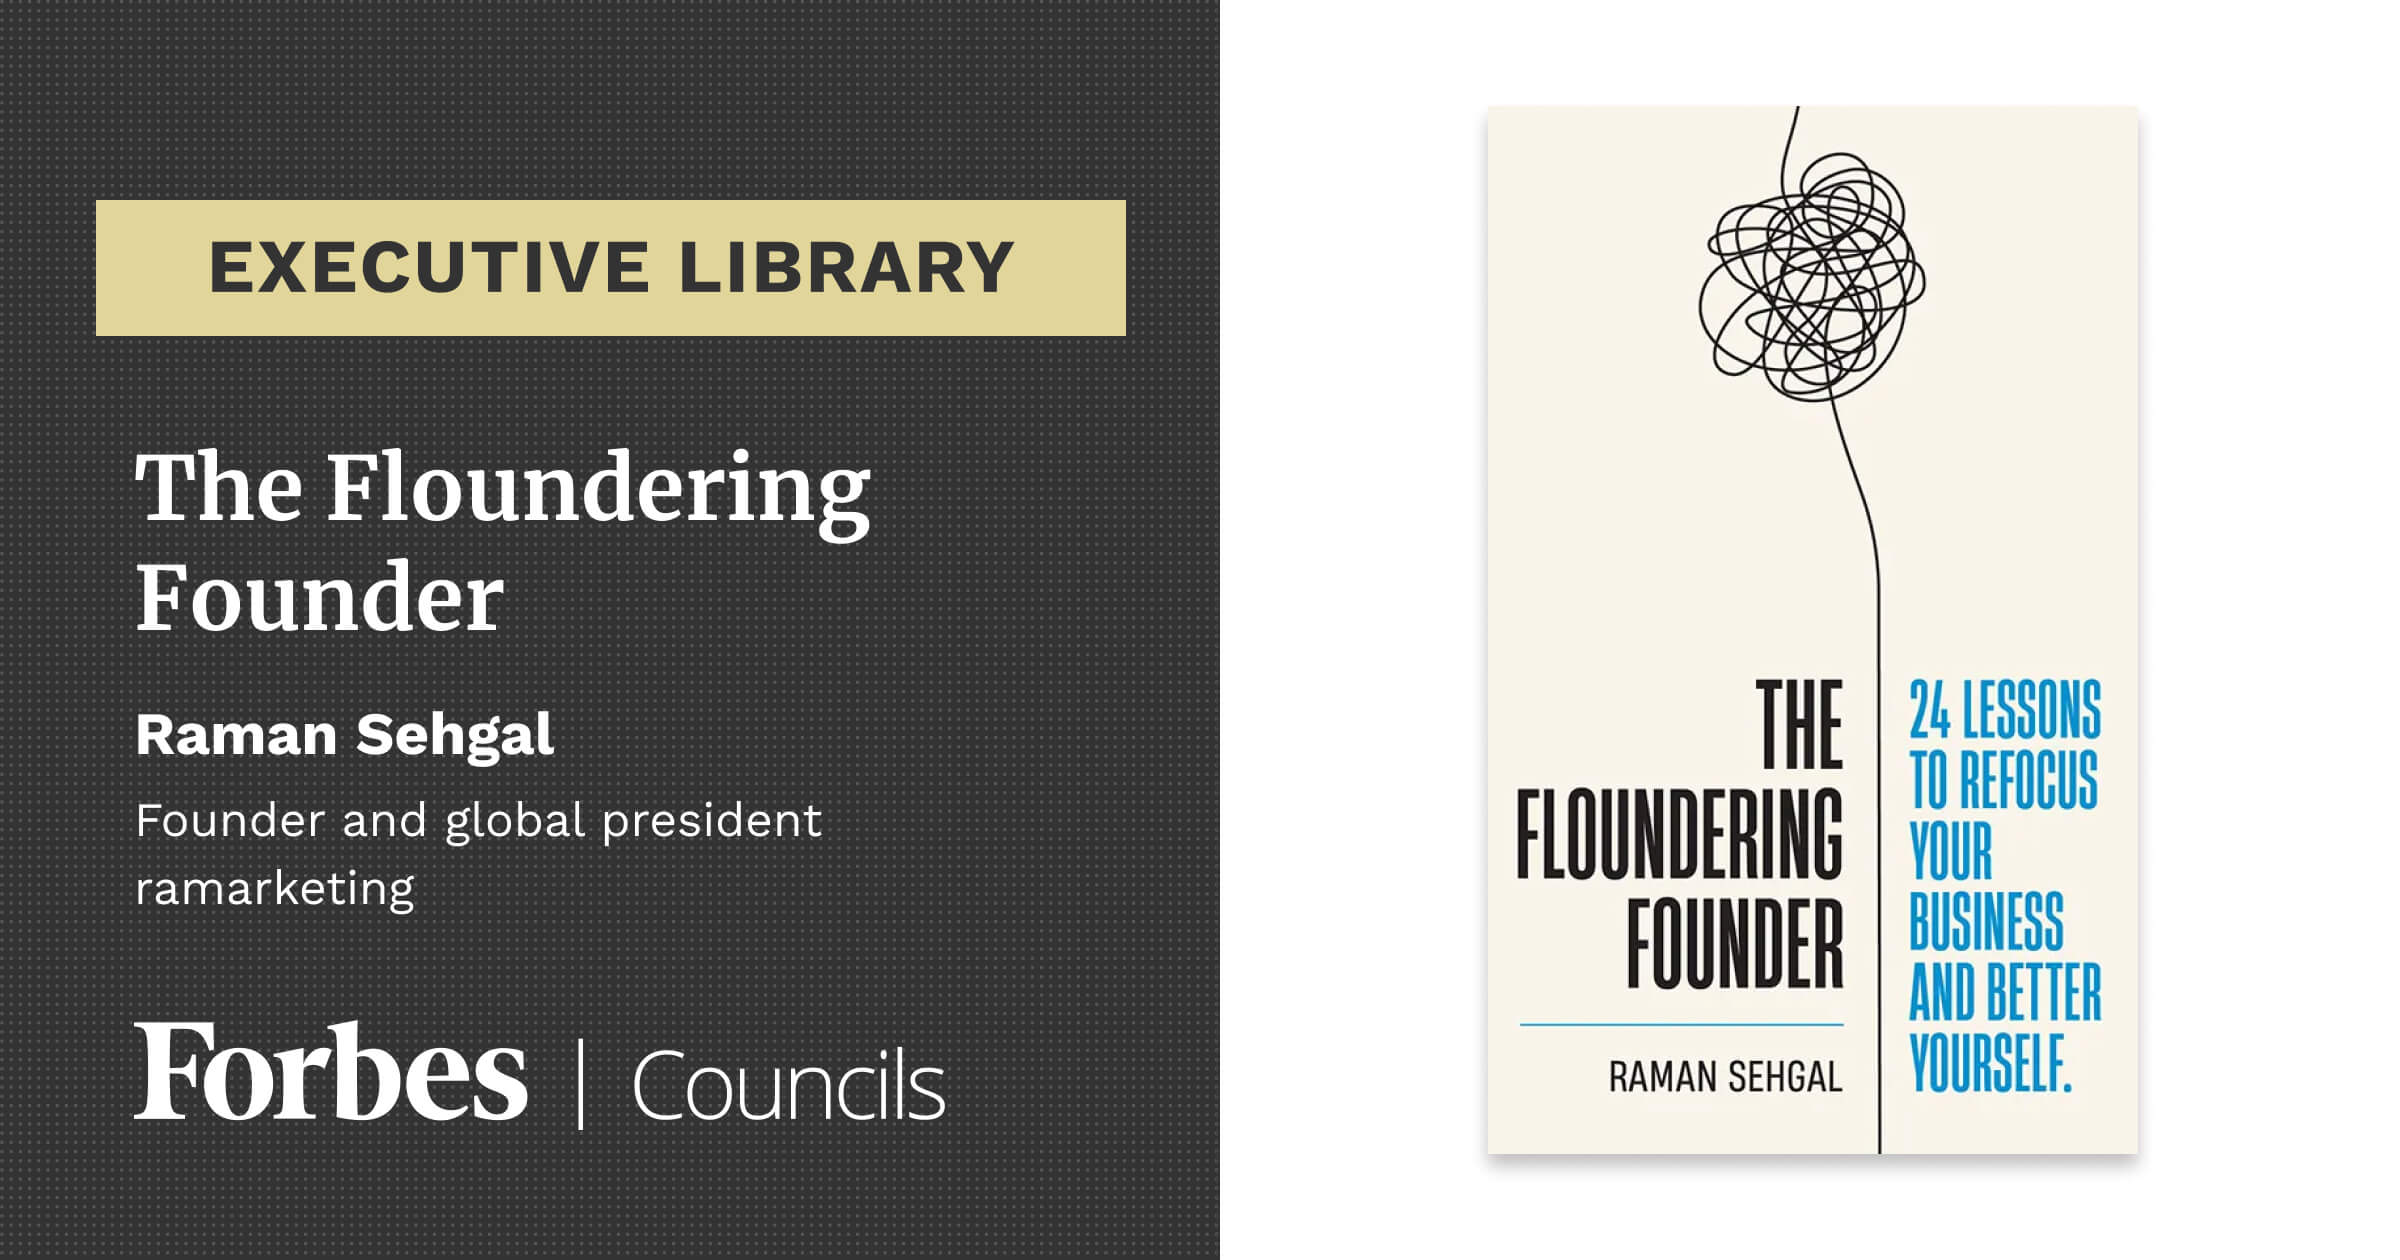 The Floundering Founder by Raman Sehgal cover image